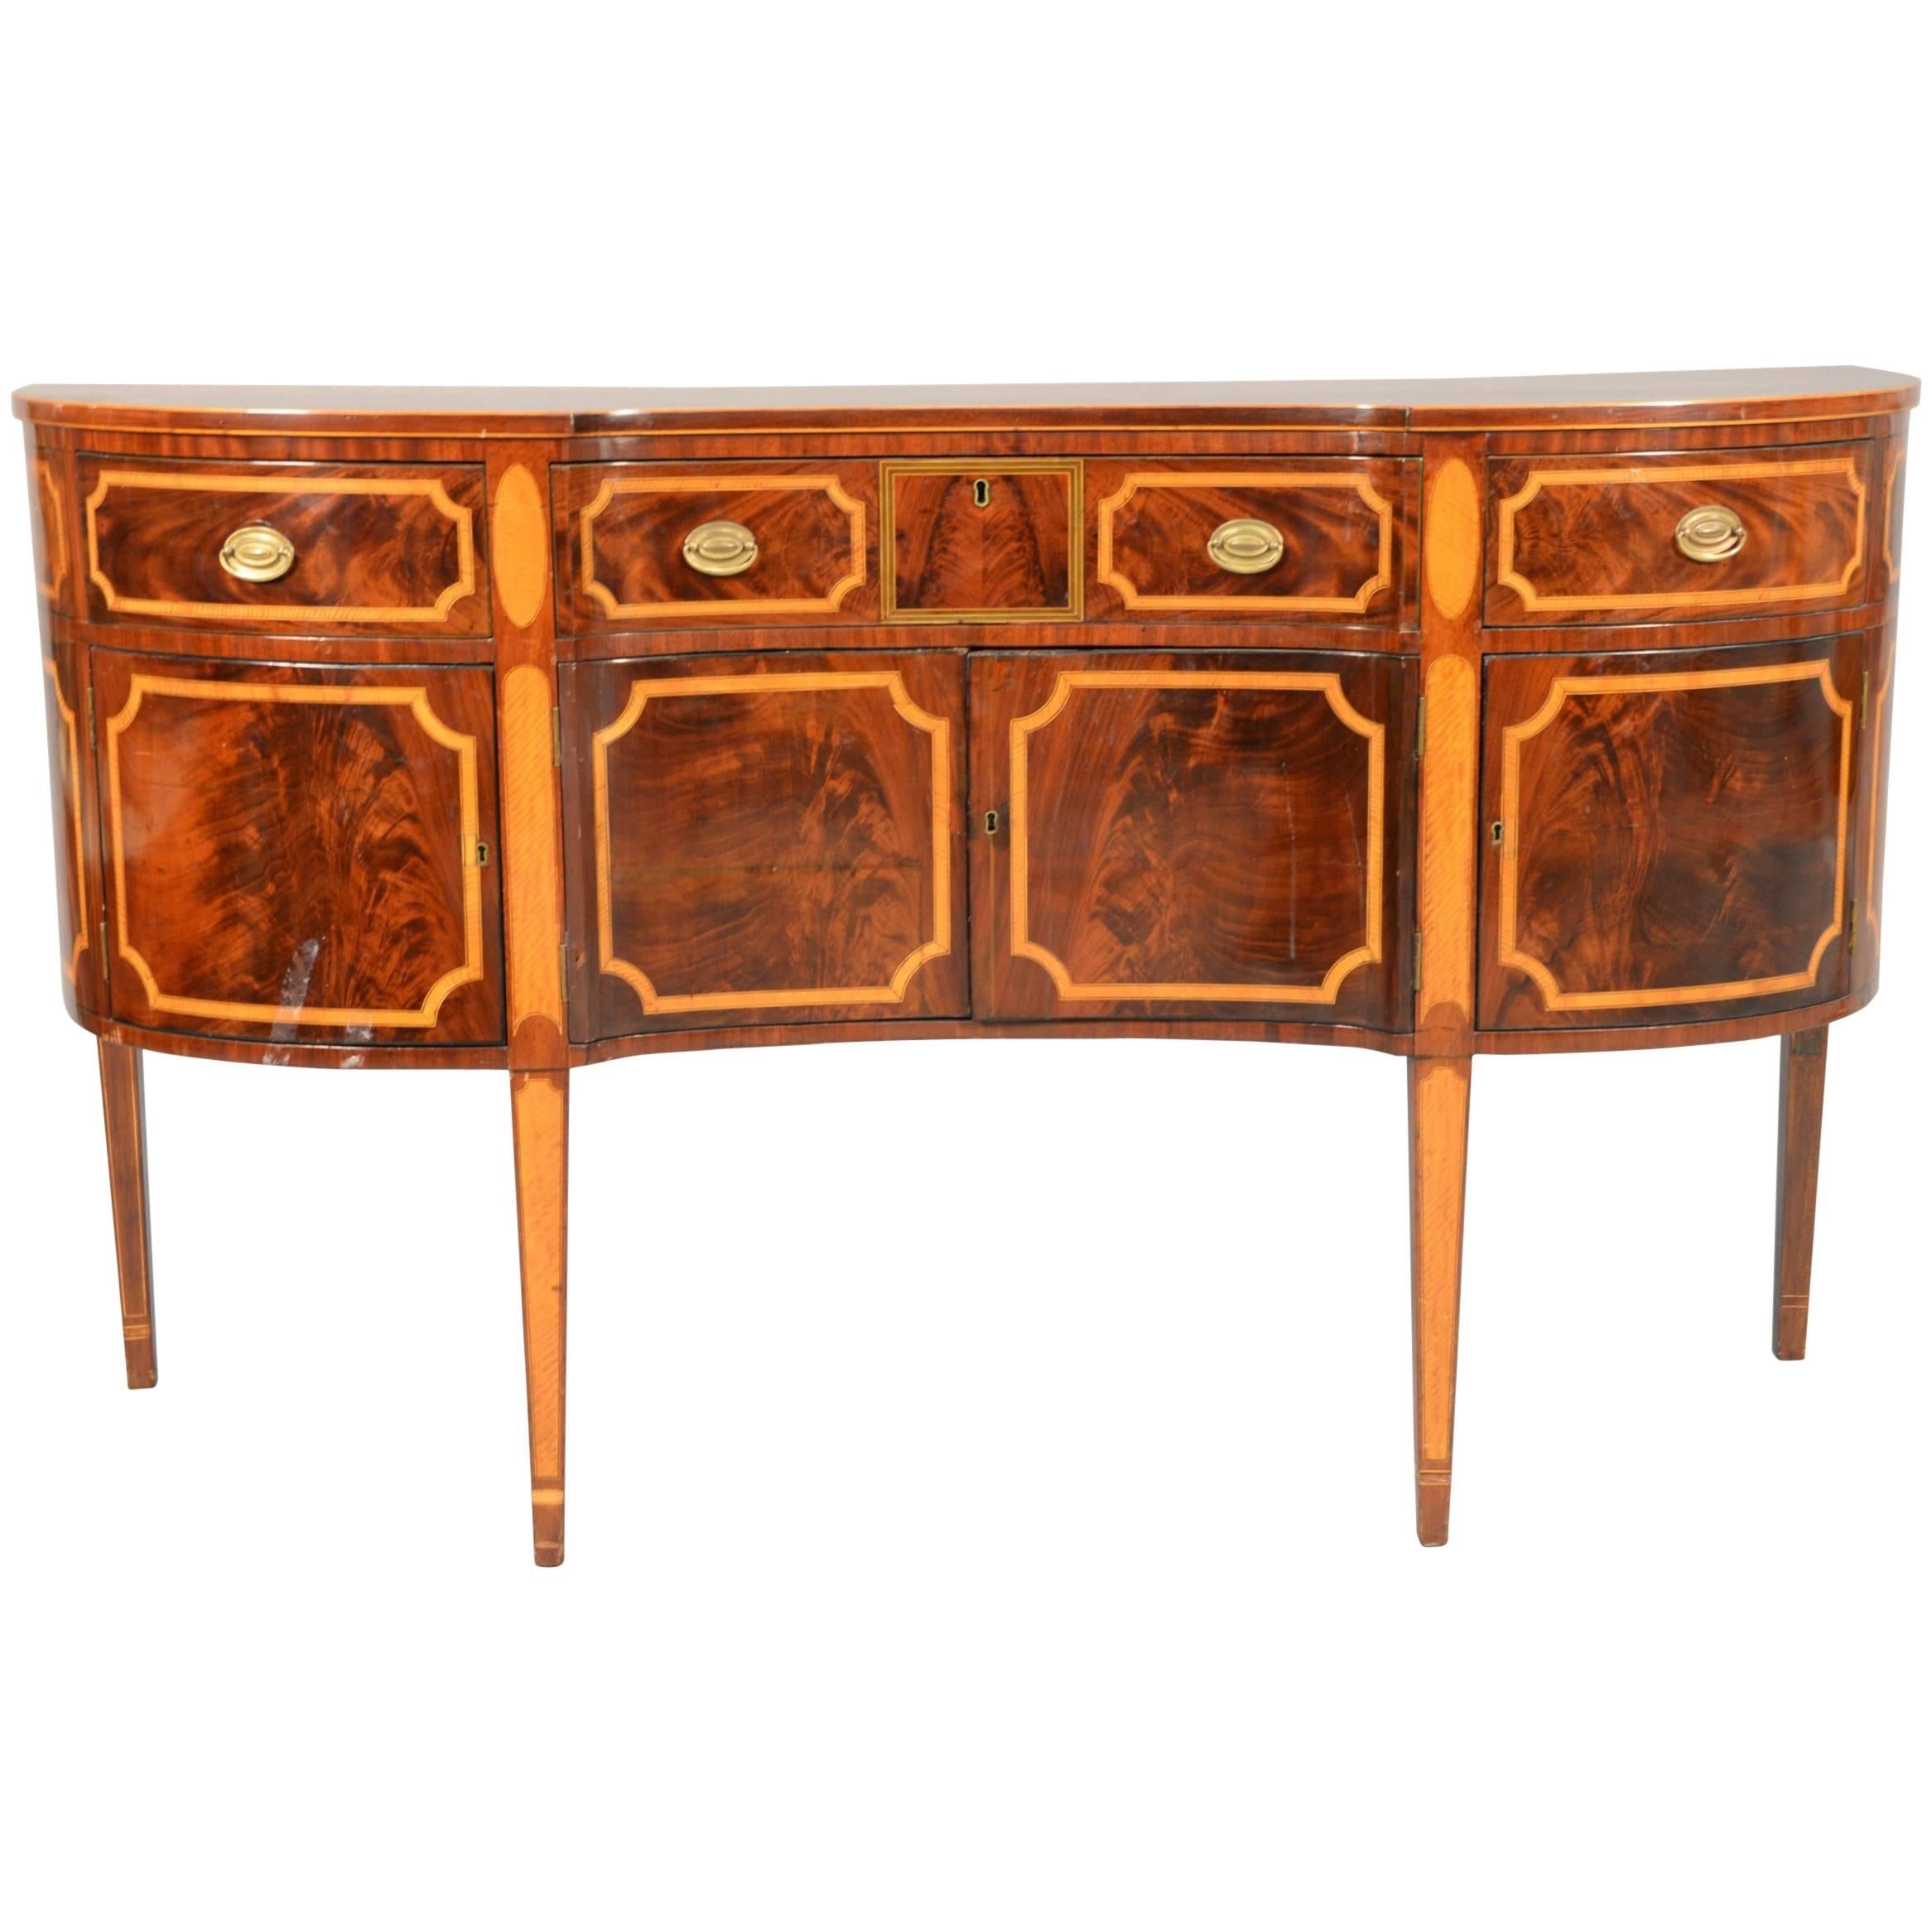 Period American Federal Sideboard in Mahogany with Tiger Maple Inlay